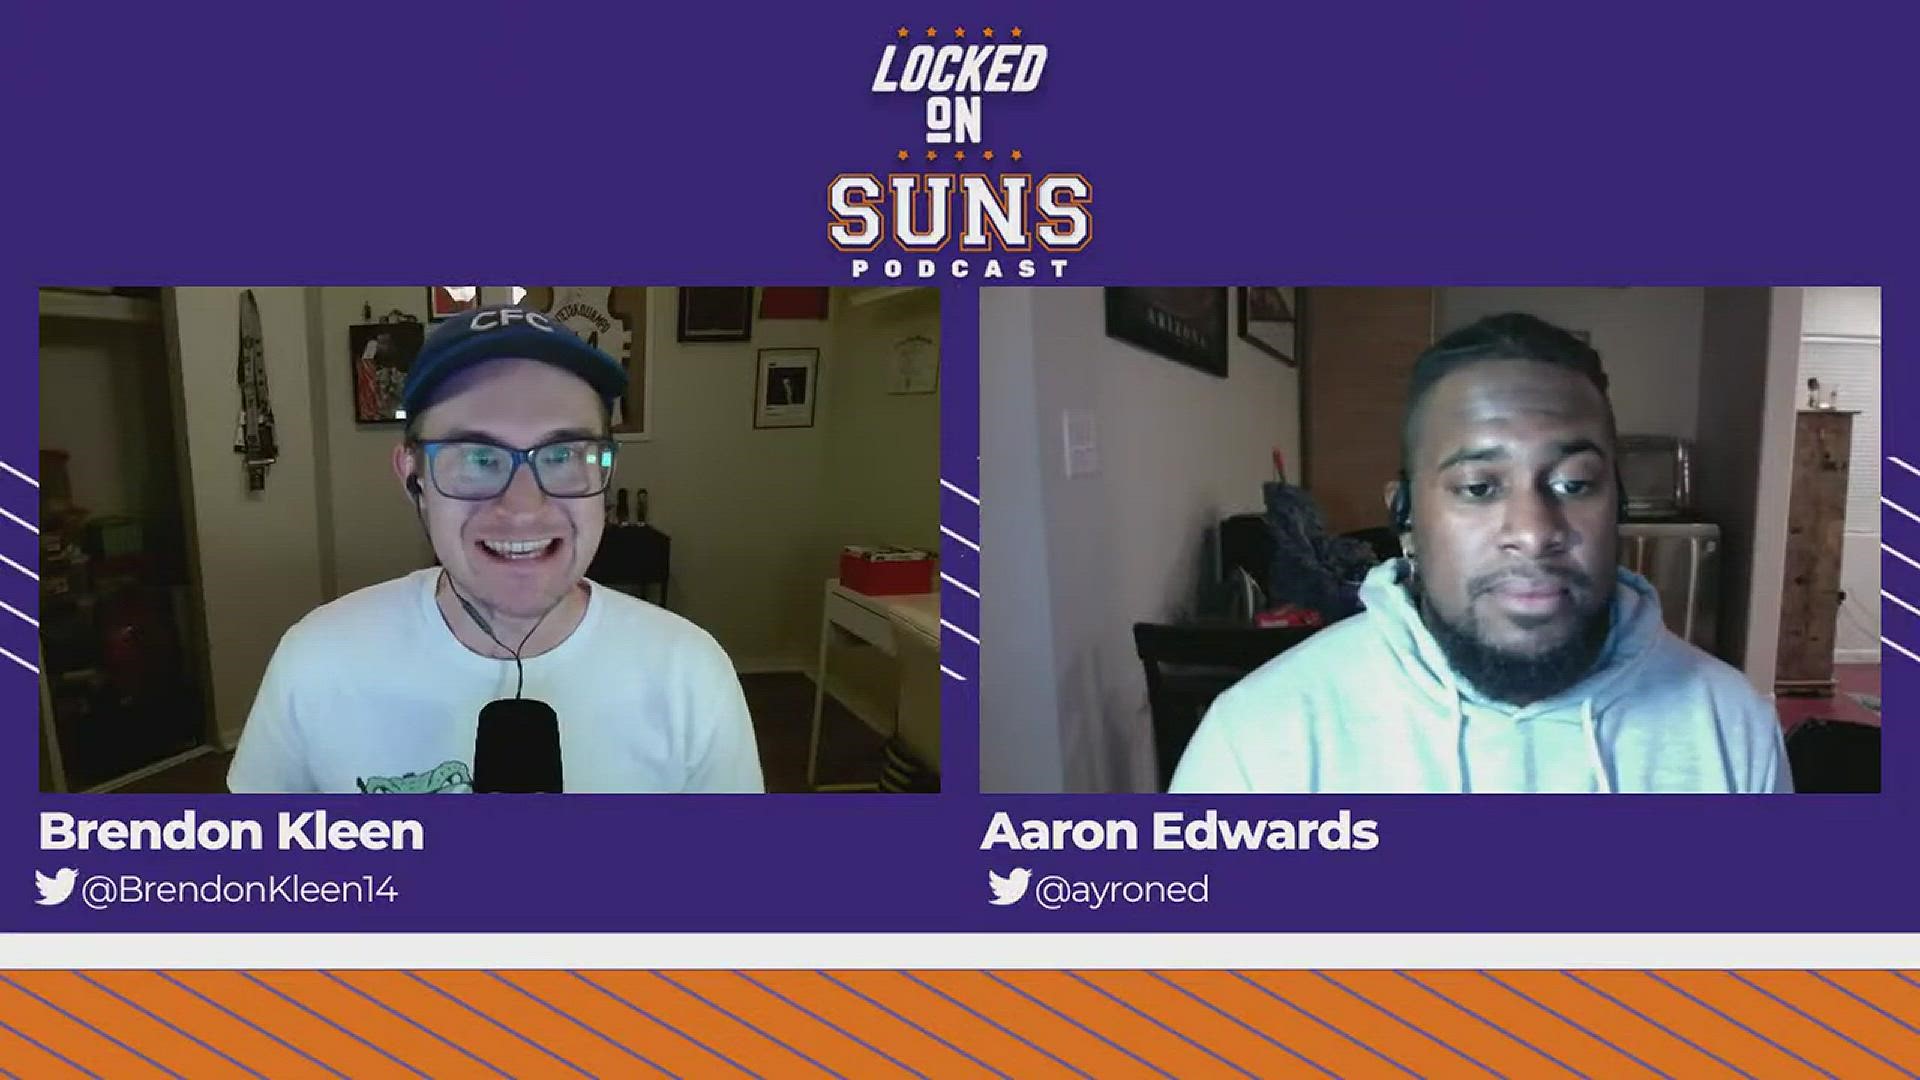 The Suns have come a long way since being a league laughing stock. They're now a perennial championship contender and one of the NBA's most high-profile franchises.